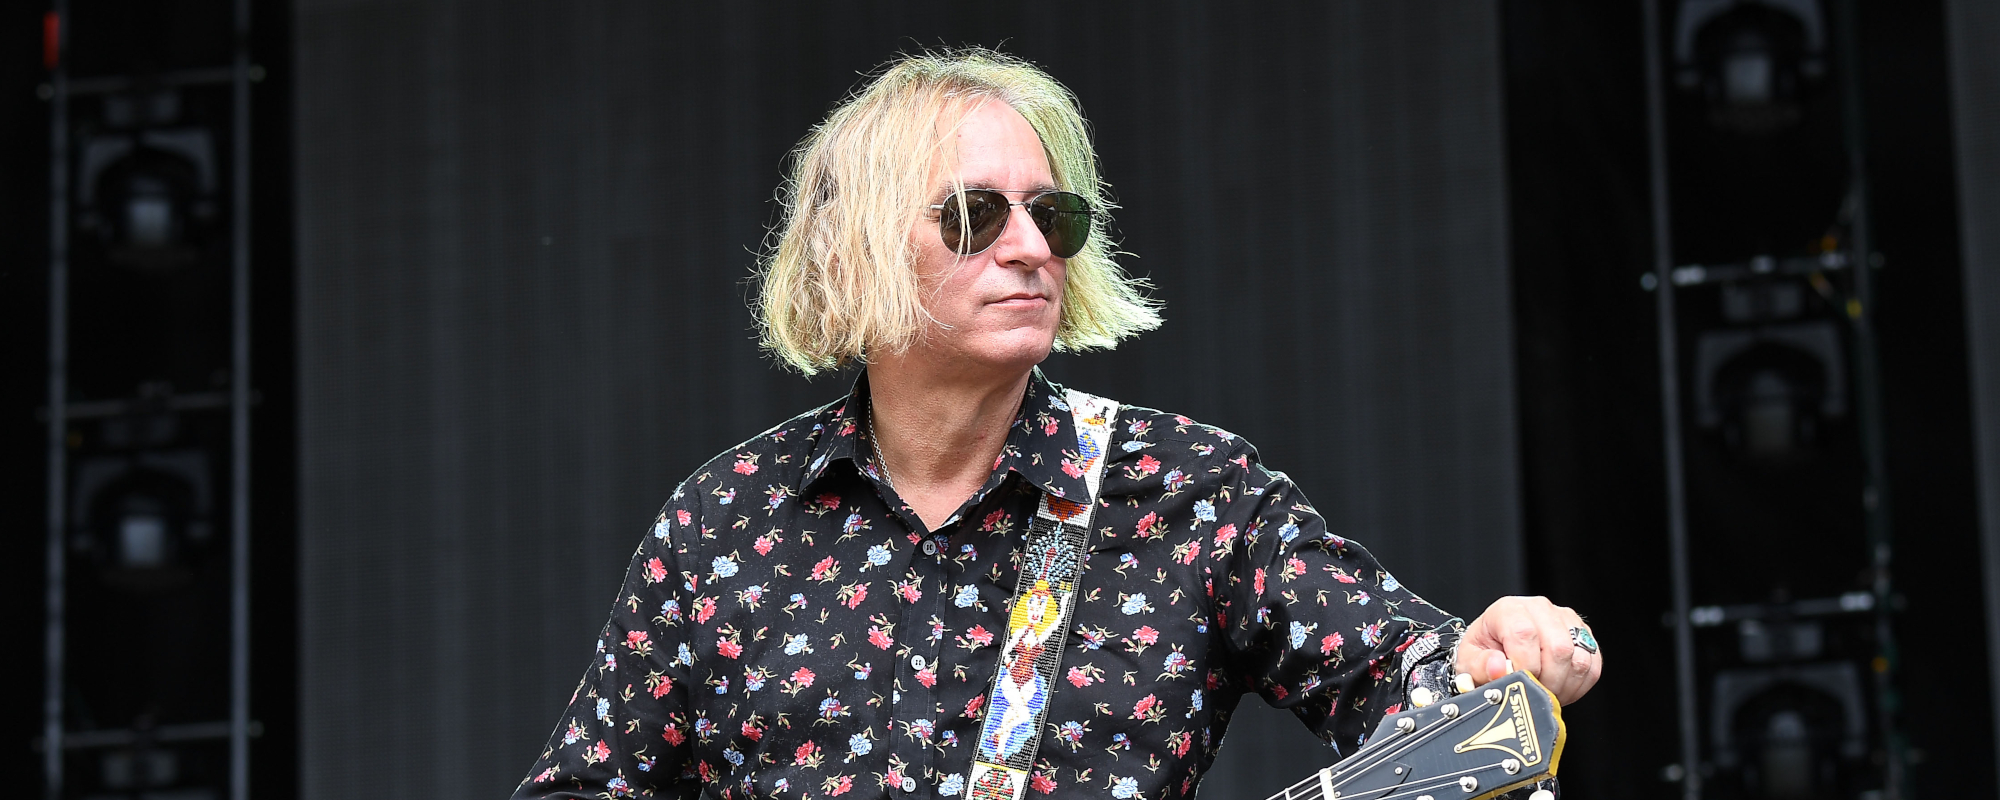 Peter Buck Says He Wouldn’t Want an R.E.M. Reunion